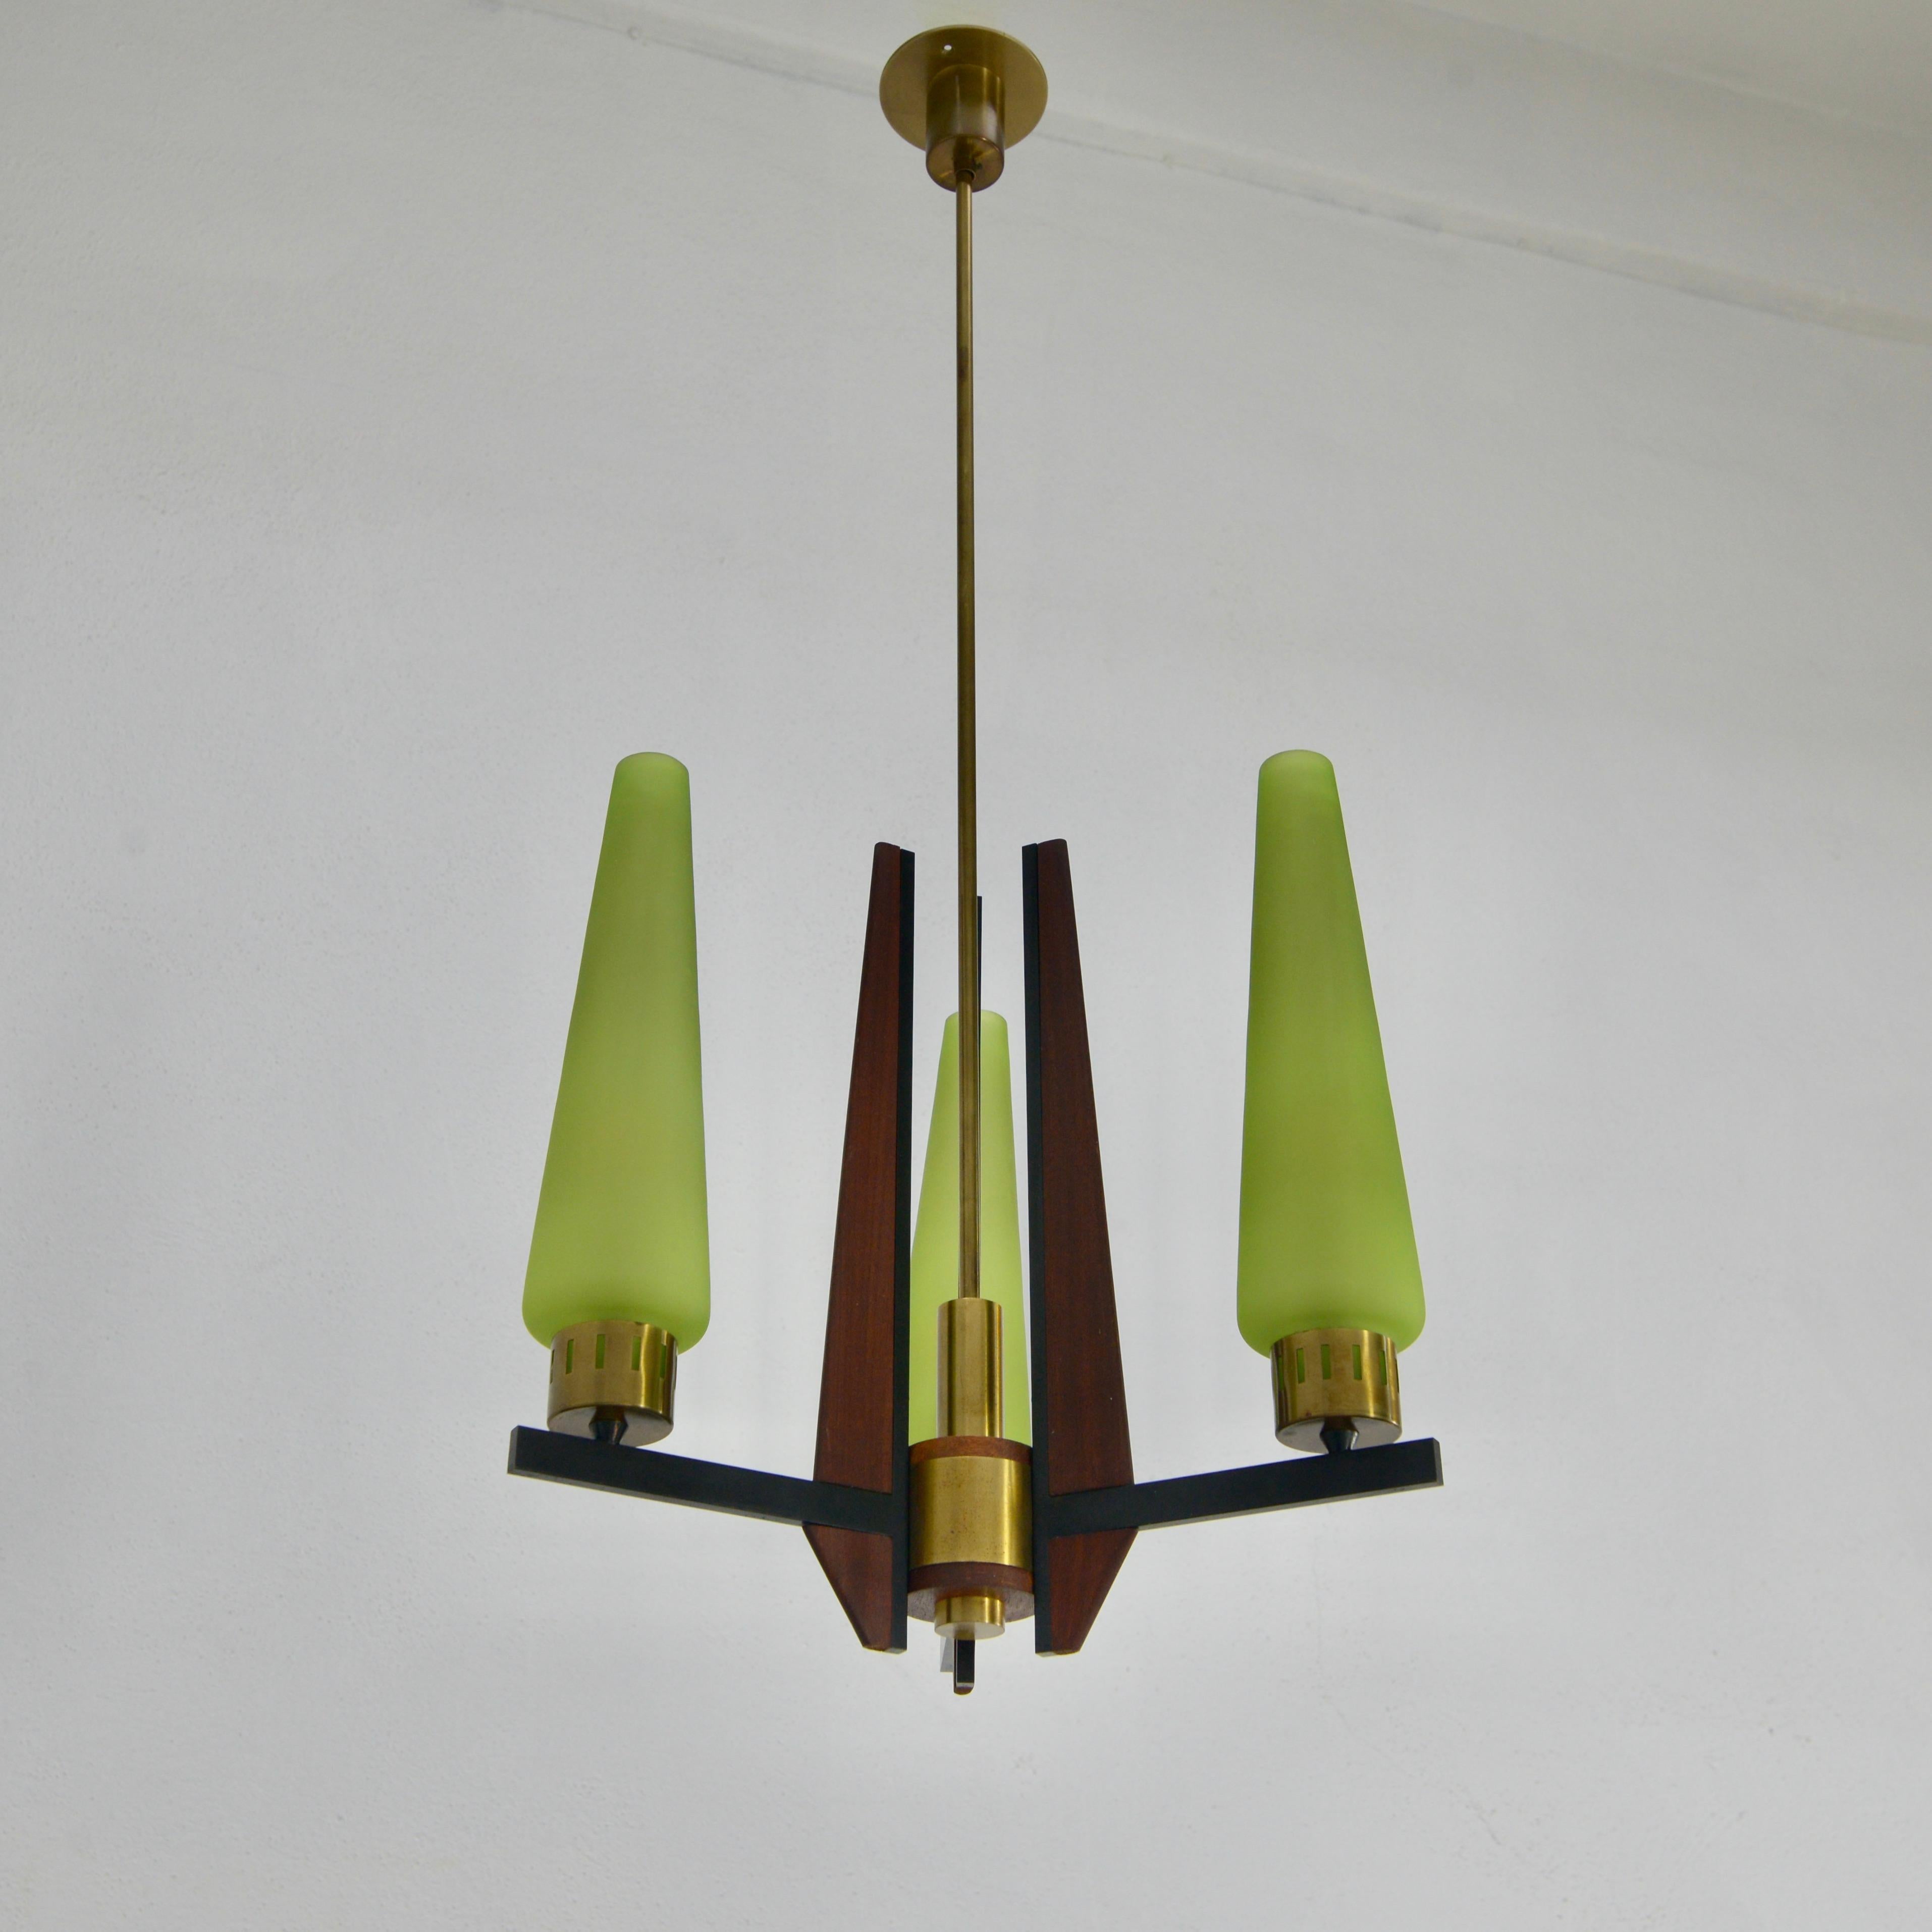 Classic of the period 1950s Italian teak wood and brass chandelier. Original green glass from the period With 3-E12 candelabra based sockets (1) per shade. Wired for use in the US. Light bulbs included with order.
Measurements:
OAD 37”
Diameter